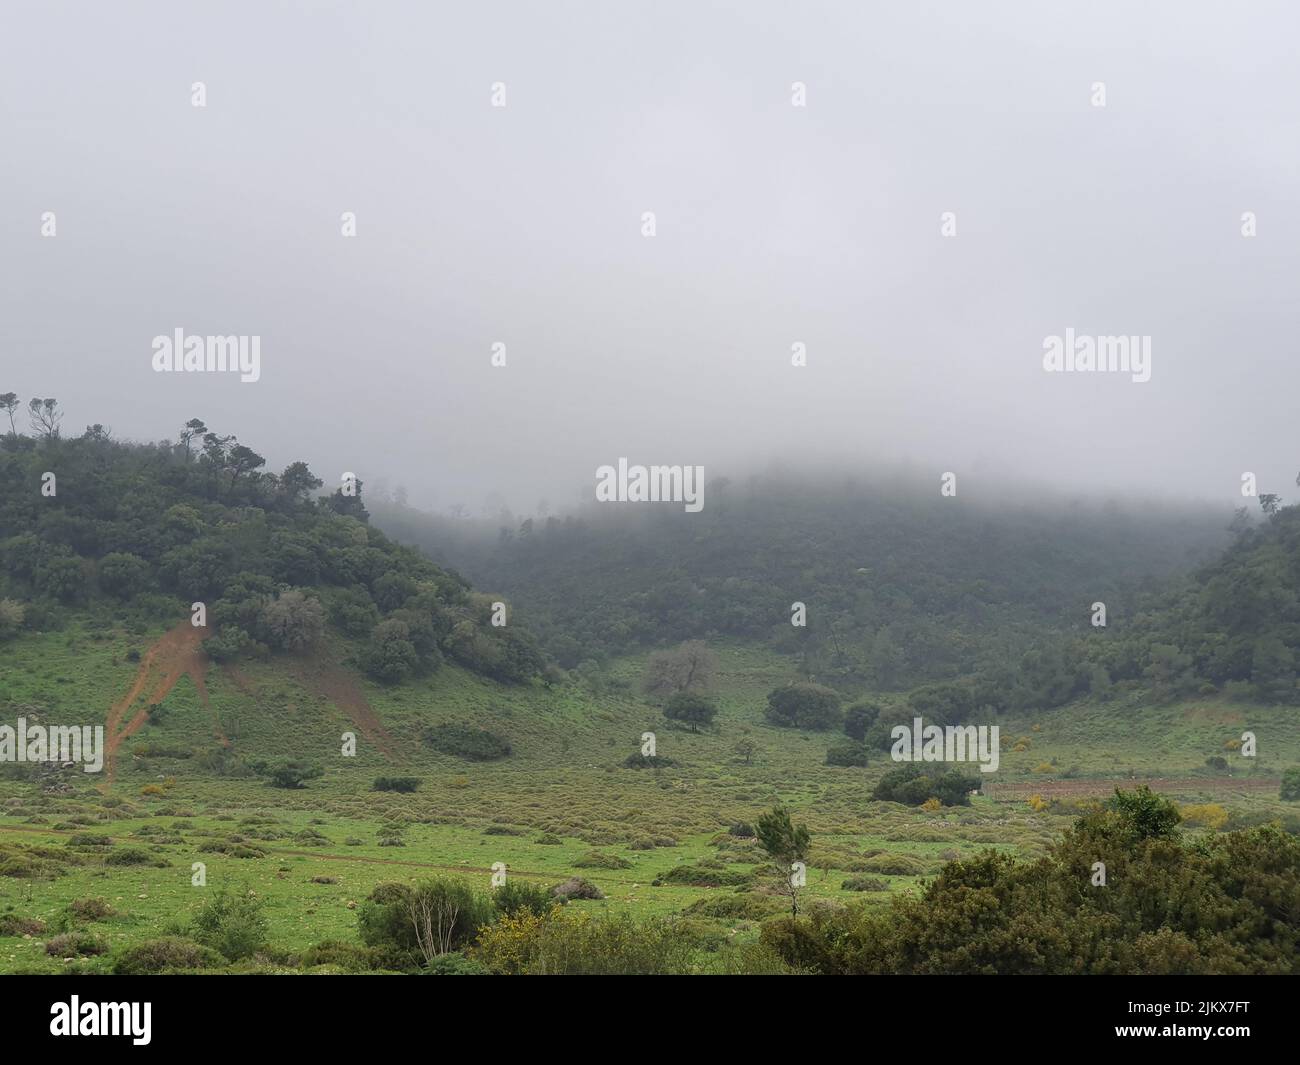 A beautiful view of nature on a misty day Stock Photo